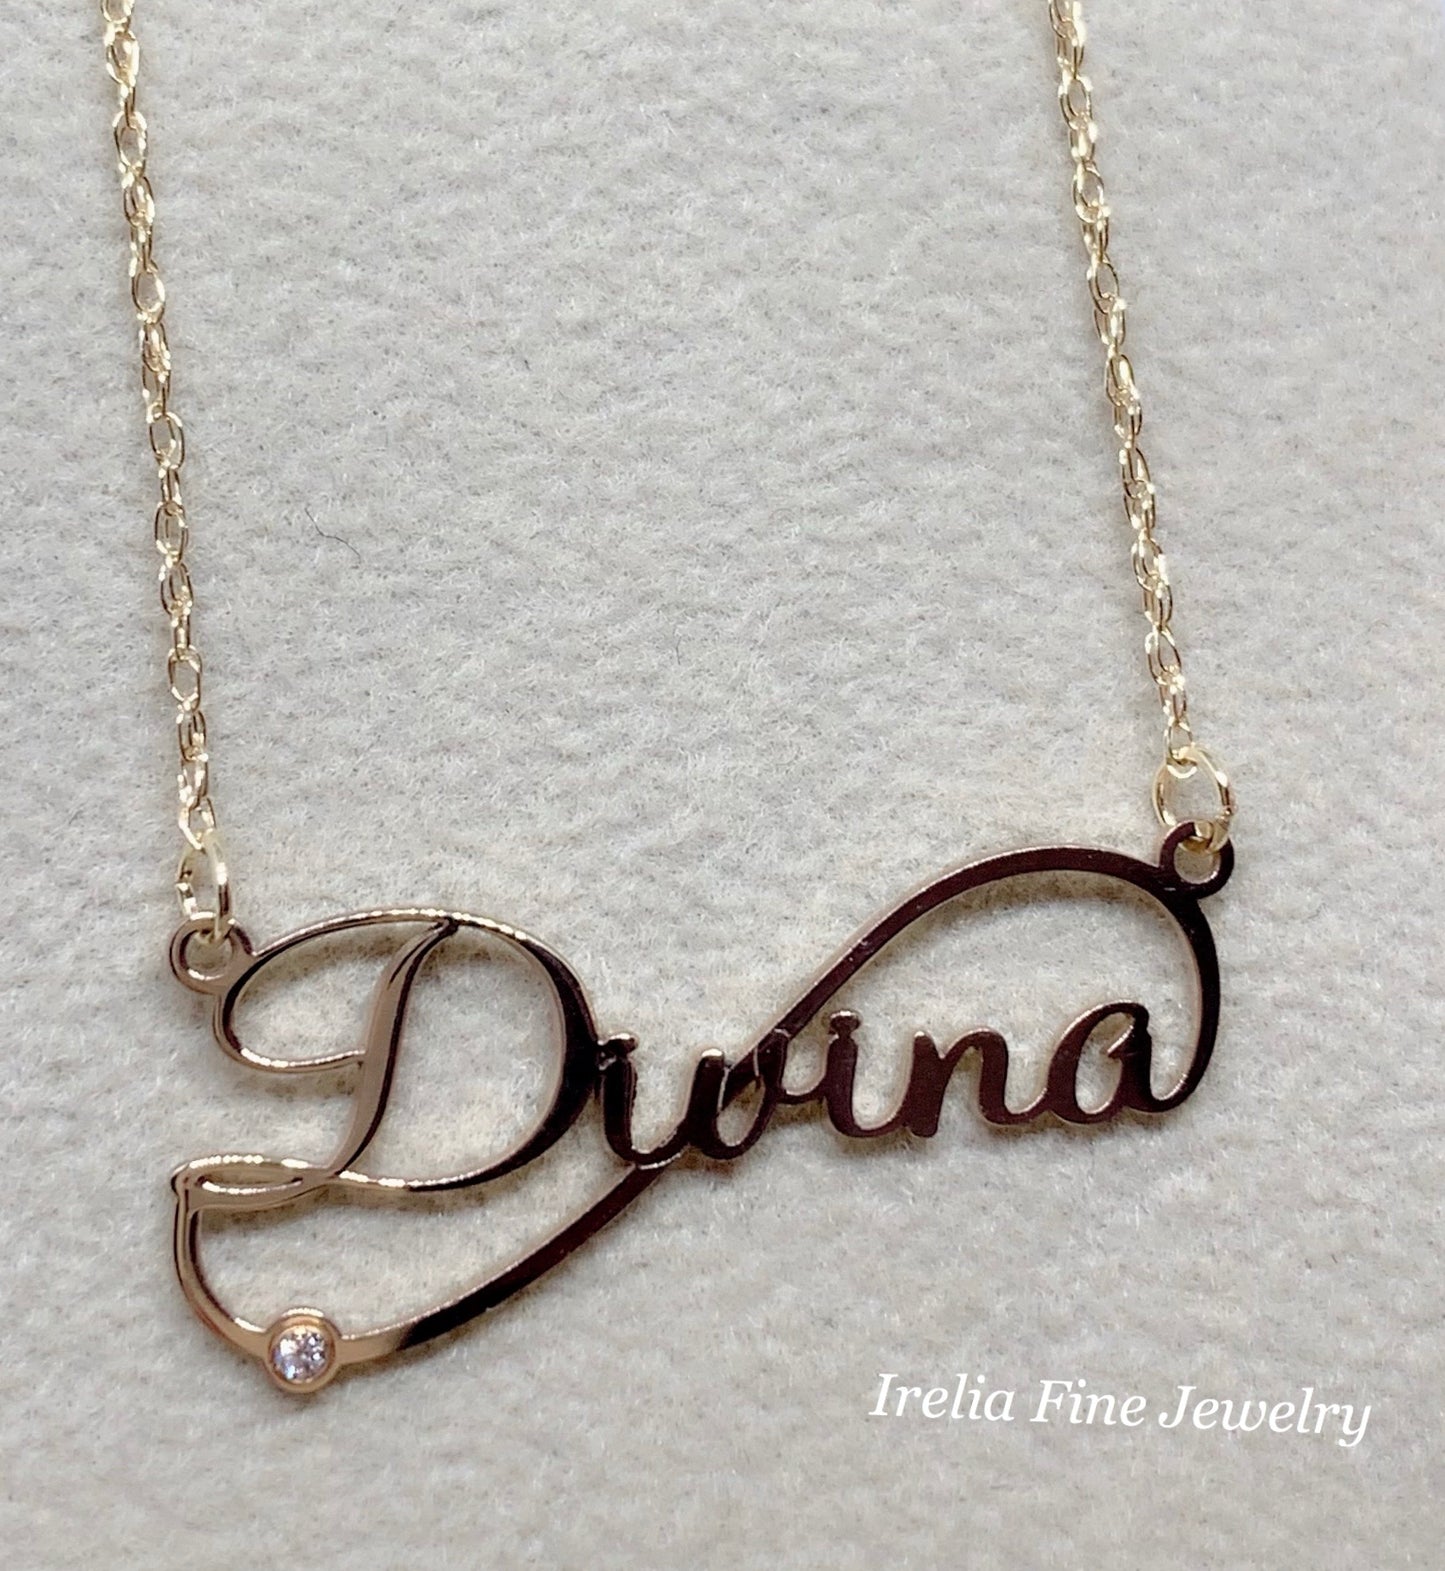 14k Yellow Gold Script Nameplate Necklace